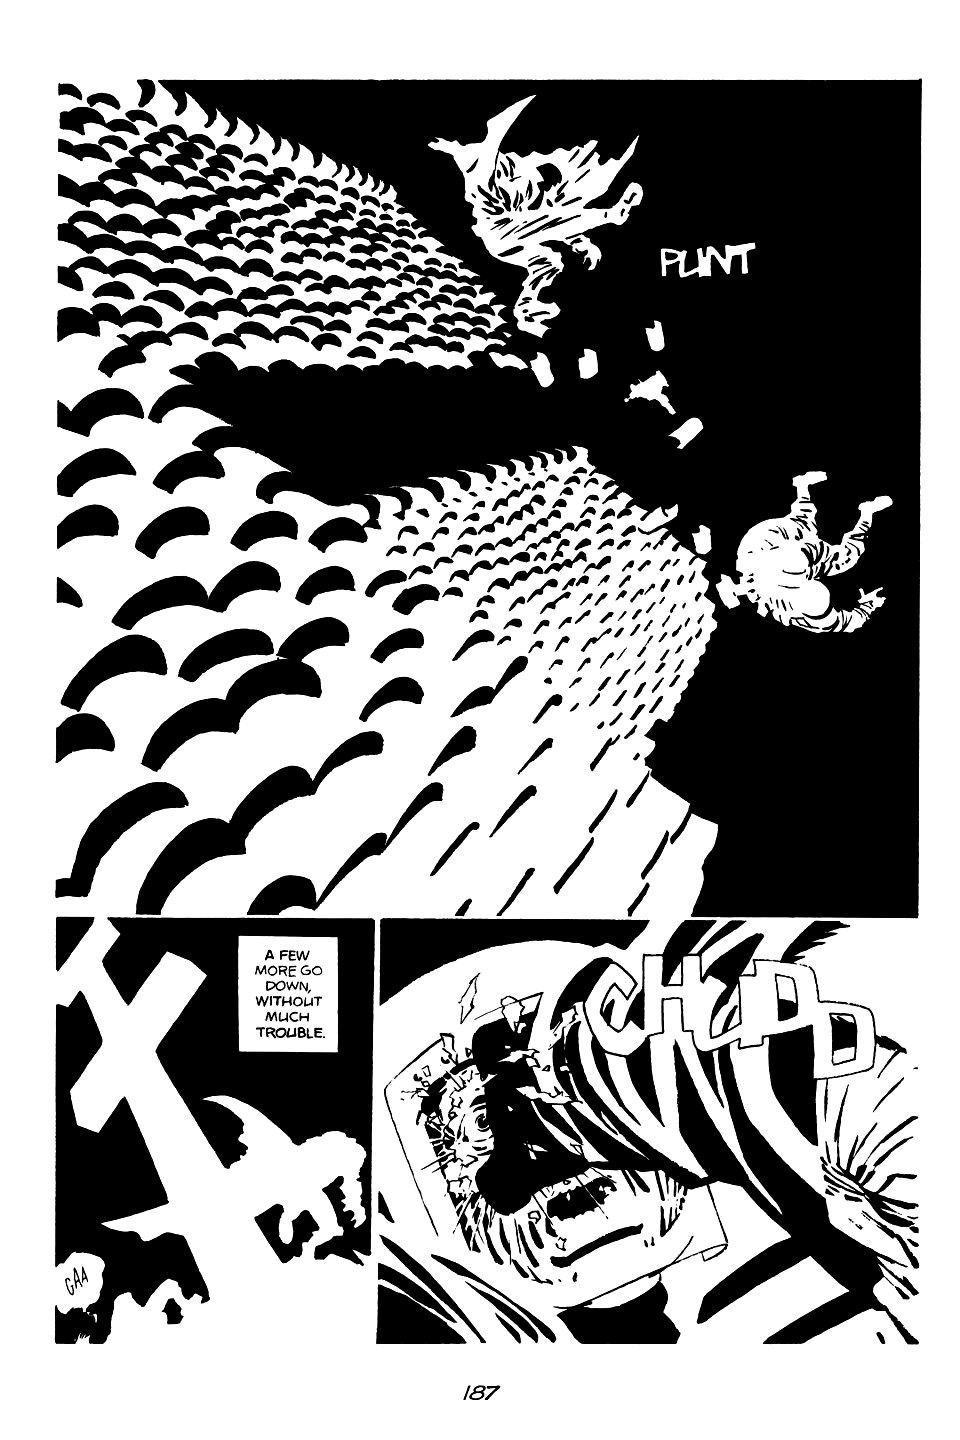 page 187 of sin city 1 the hard goodbye